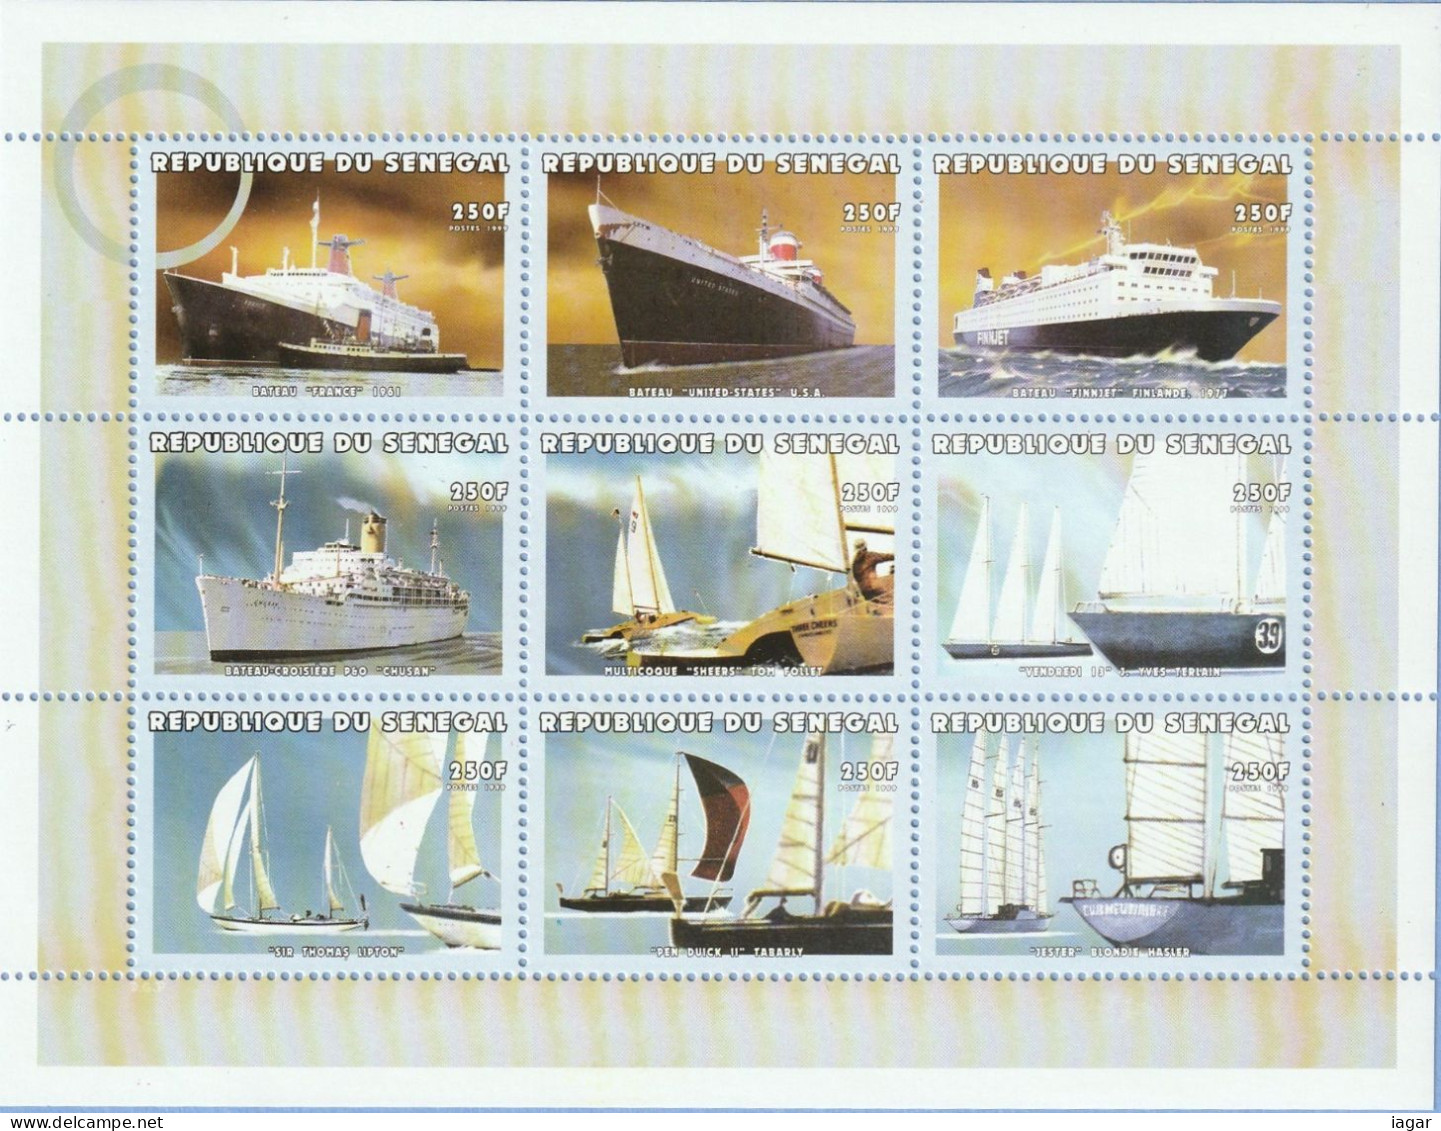 THEMATIC TRANSPORT: HISTORIC SHIPS AND FAMOUS SAILING SHIPS. LE"FRANCE", "UNITED STATES", "PEN DUICK II"  Etc  - SENEGAL - Otros (Mar)